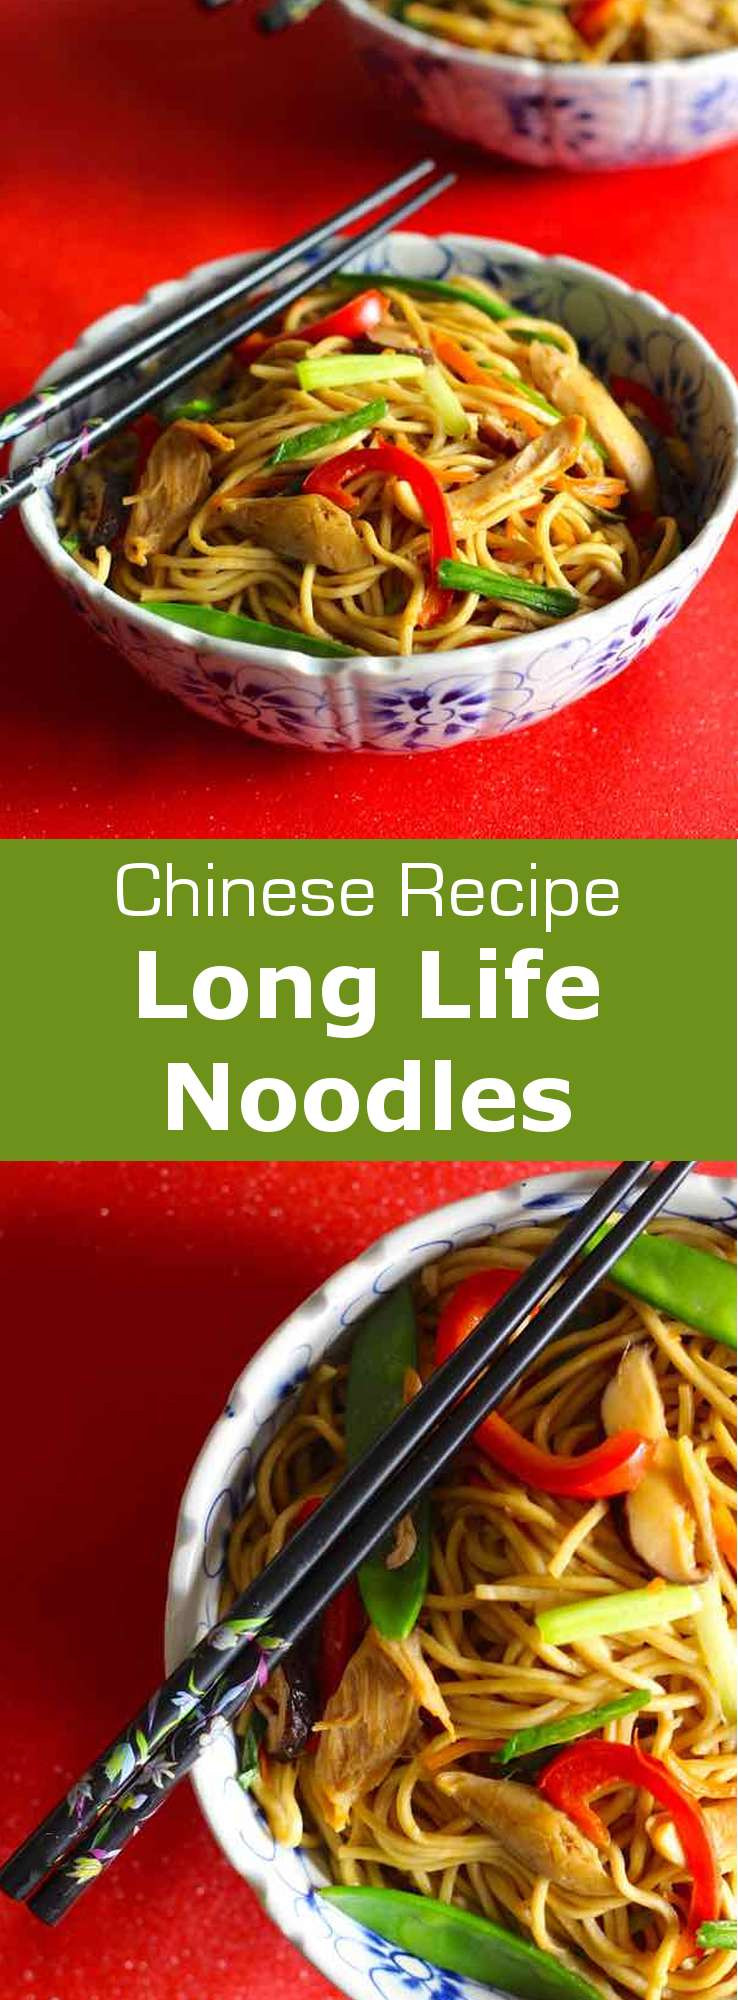 Chinese Birthday Noodles
 Long Life Noodles Traditional Chinese Recipe